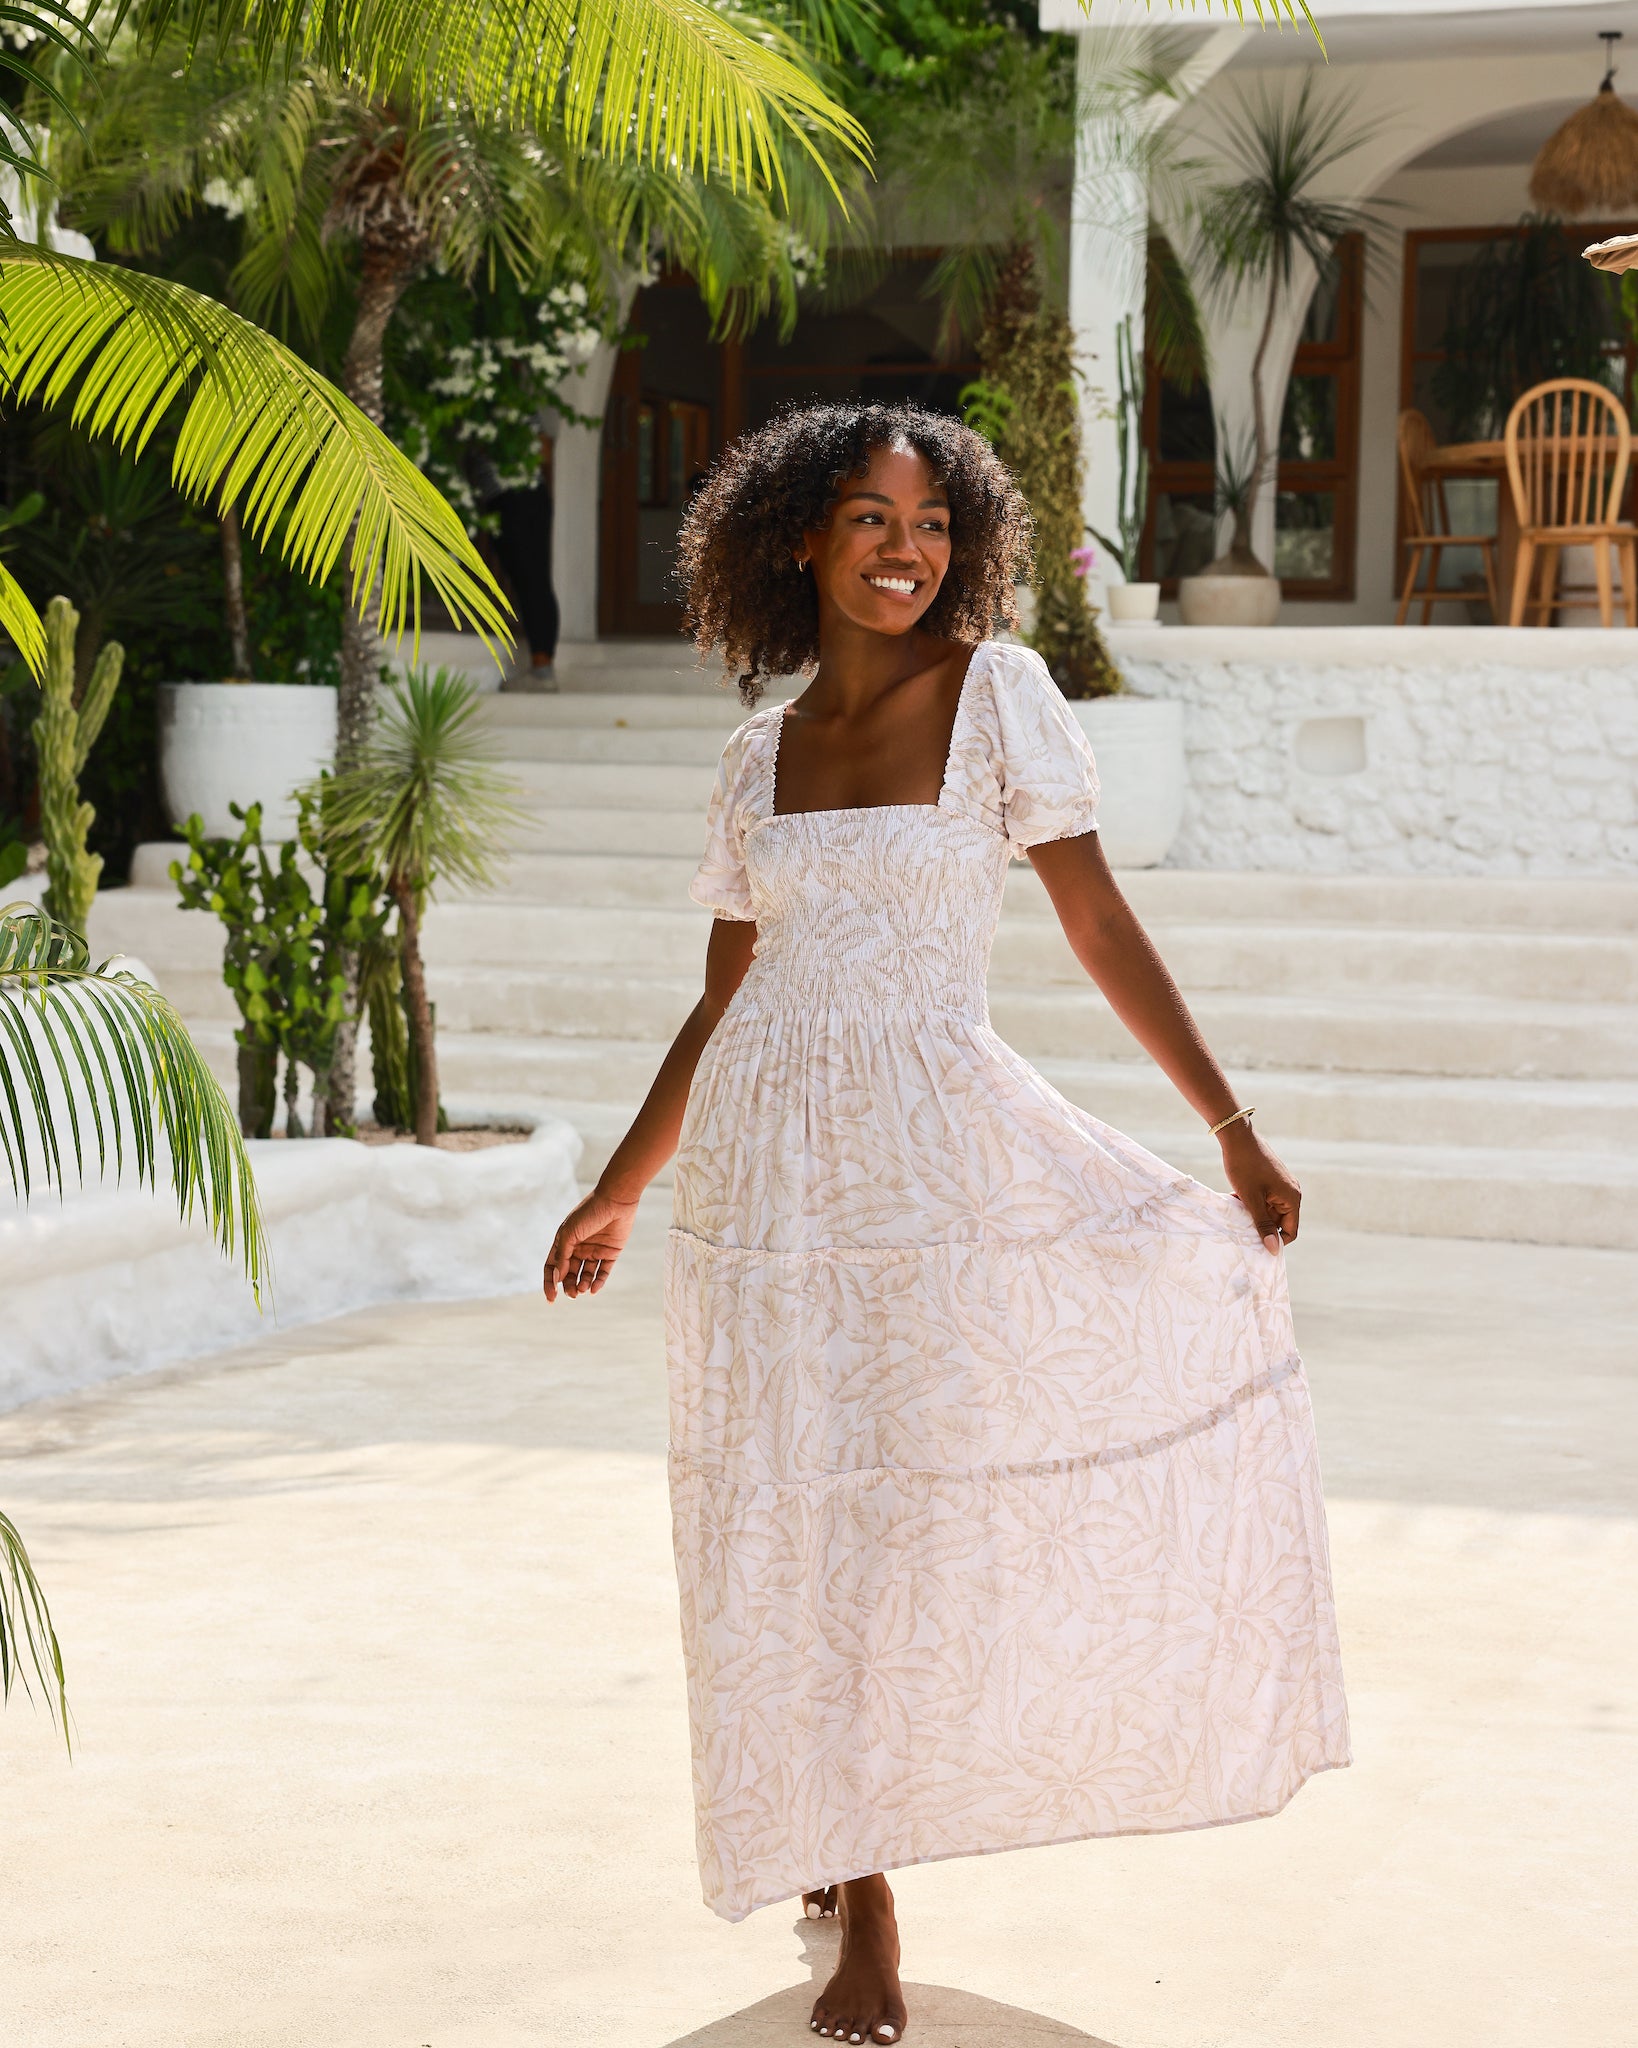 The Bamboo Smocked Dress - Bali | Dresses by Kenny Flowers